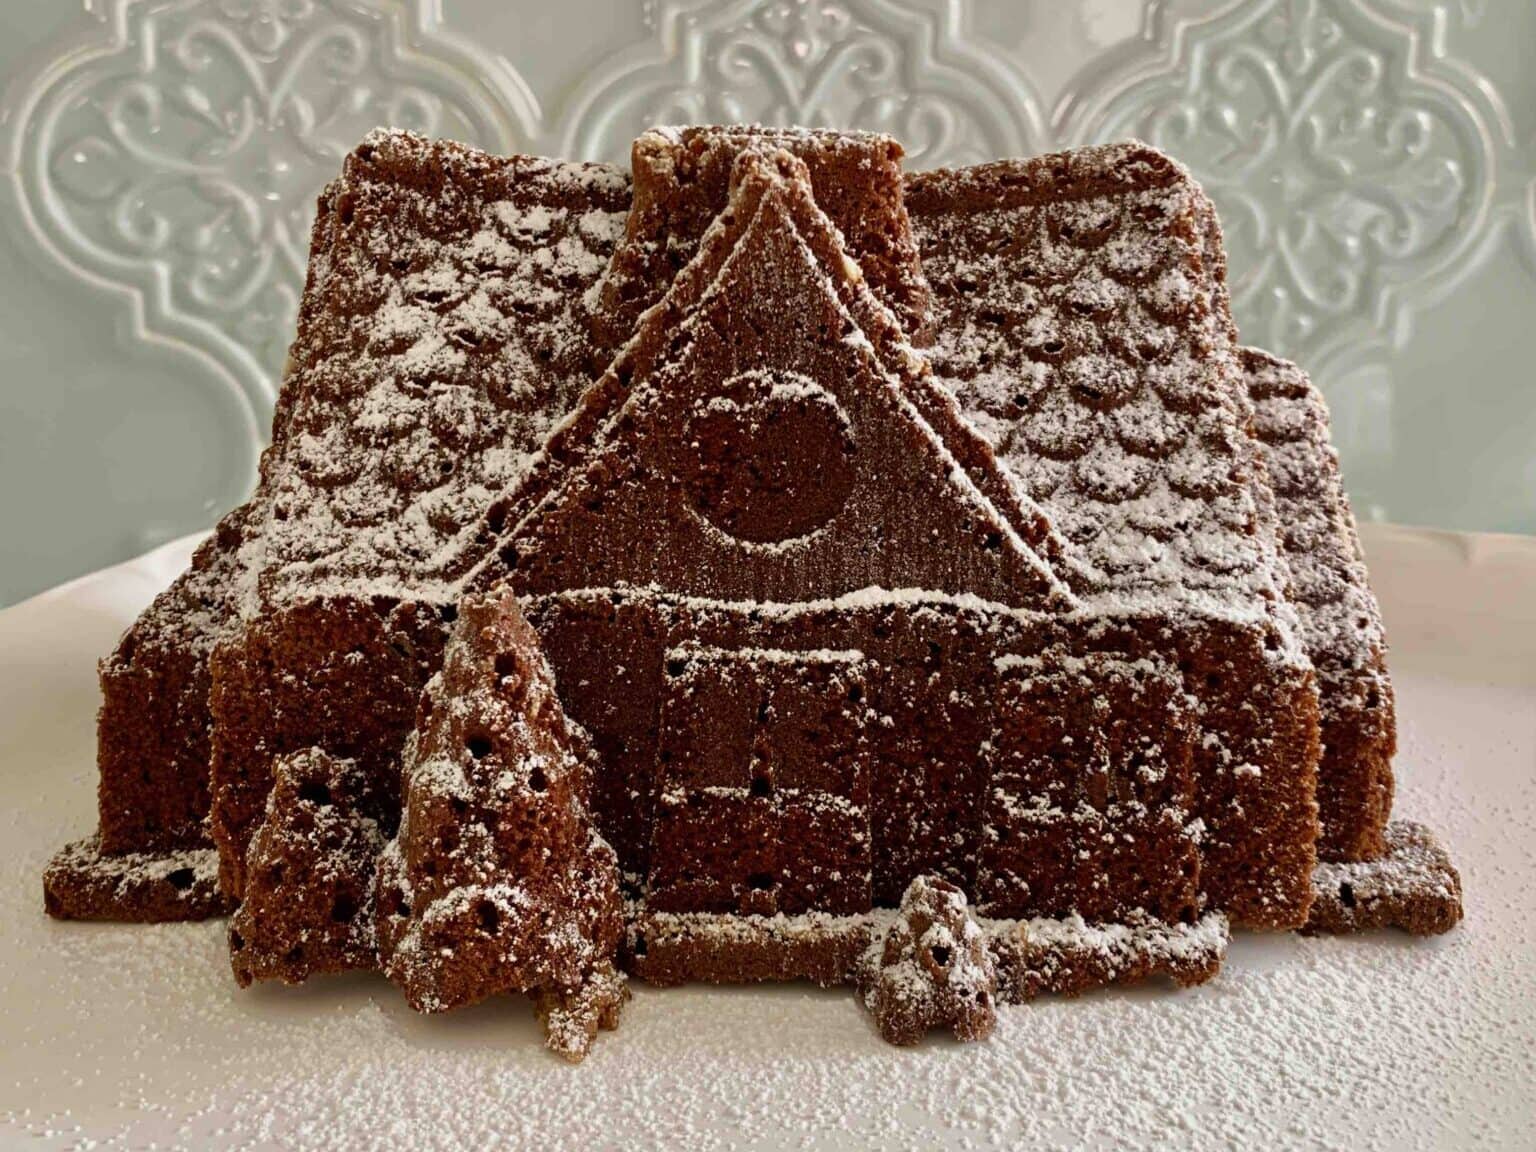 A gingerbread house on a plate with powdered sugar.